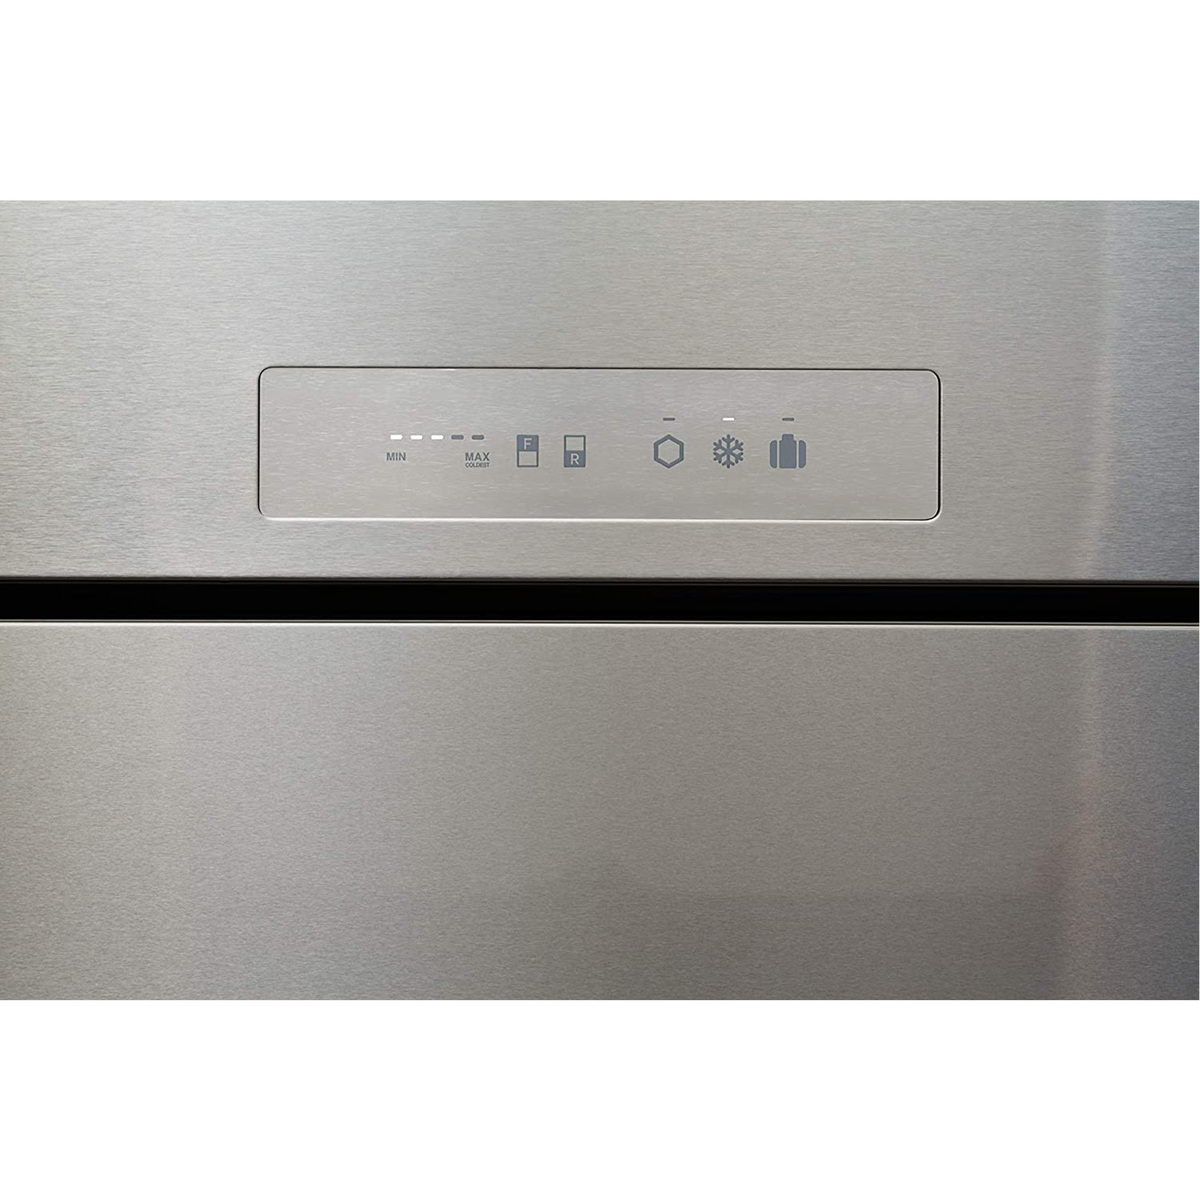 Sharp E-Pro Inverter Series With Plasmacluster Ion Technology 600 Ltrs (Net Capacity)Two Door Refrigerator, Stainless Steel Color, SJ-SMF750-SL3